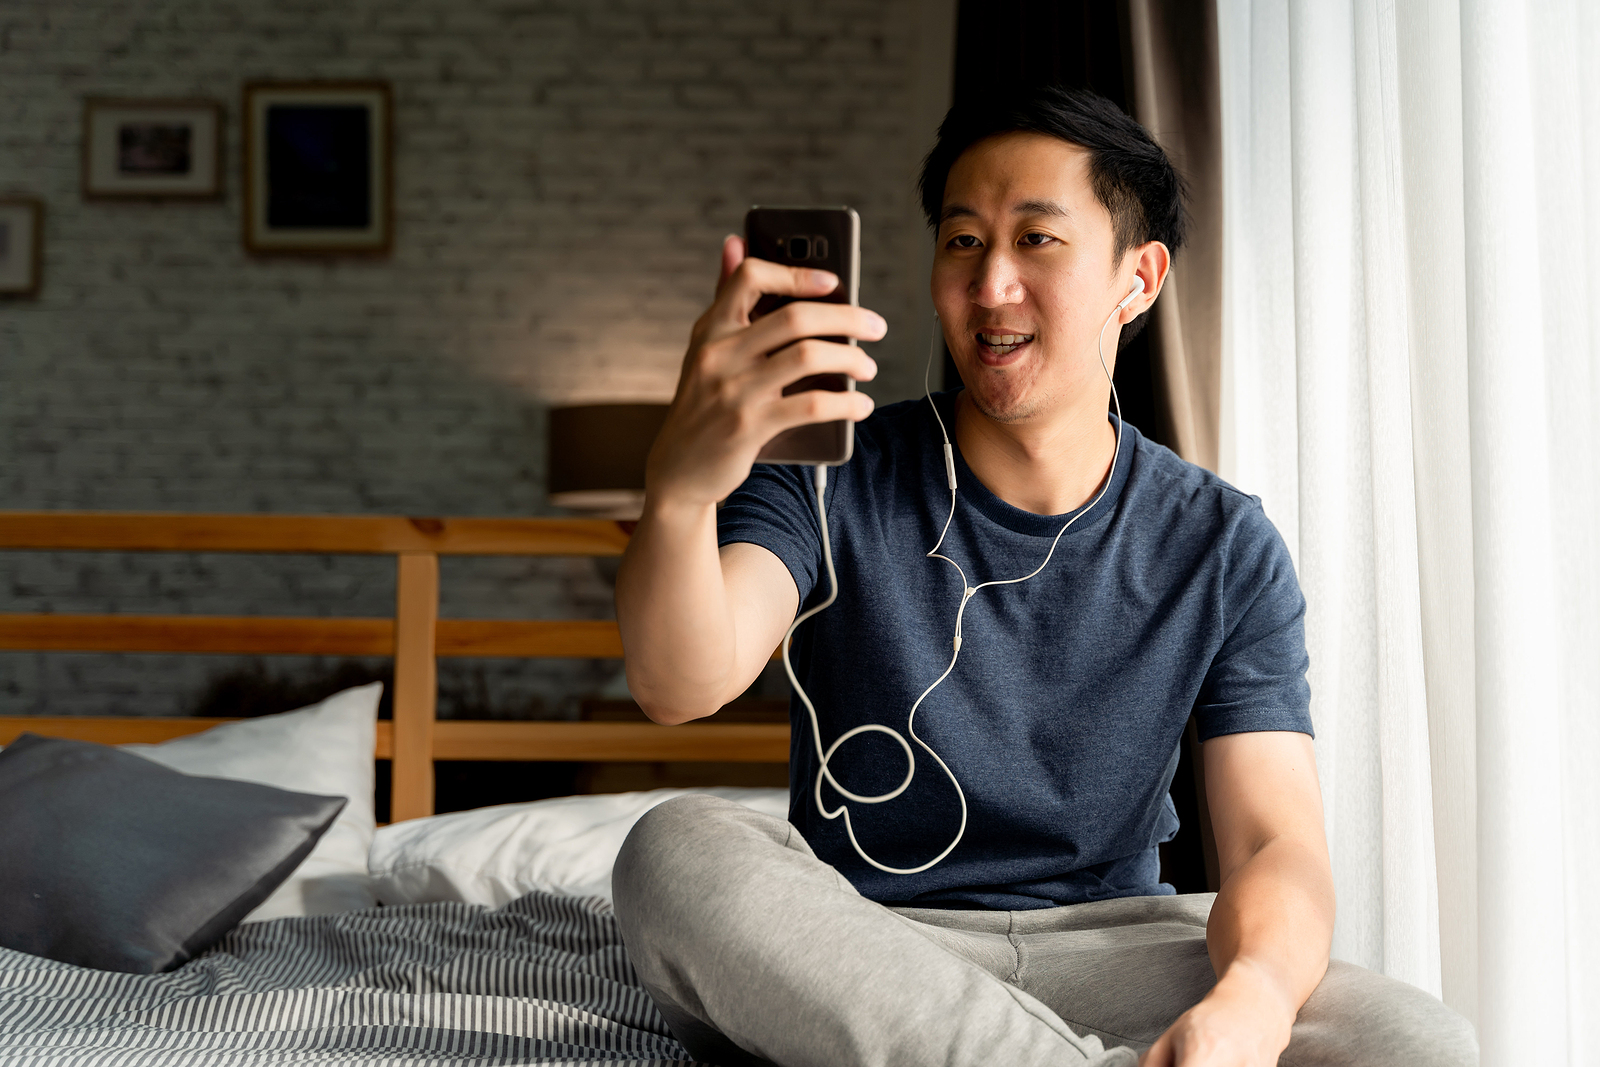 Attractive young Asian man sitting on his bed and smiling while video chatting with someone on his phone.